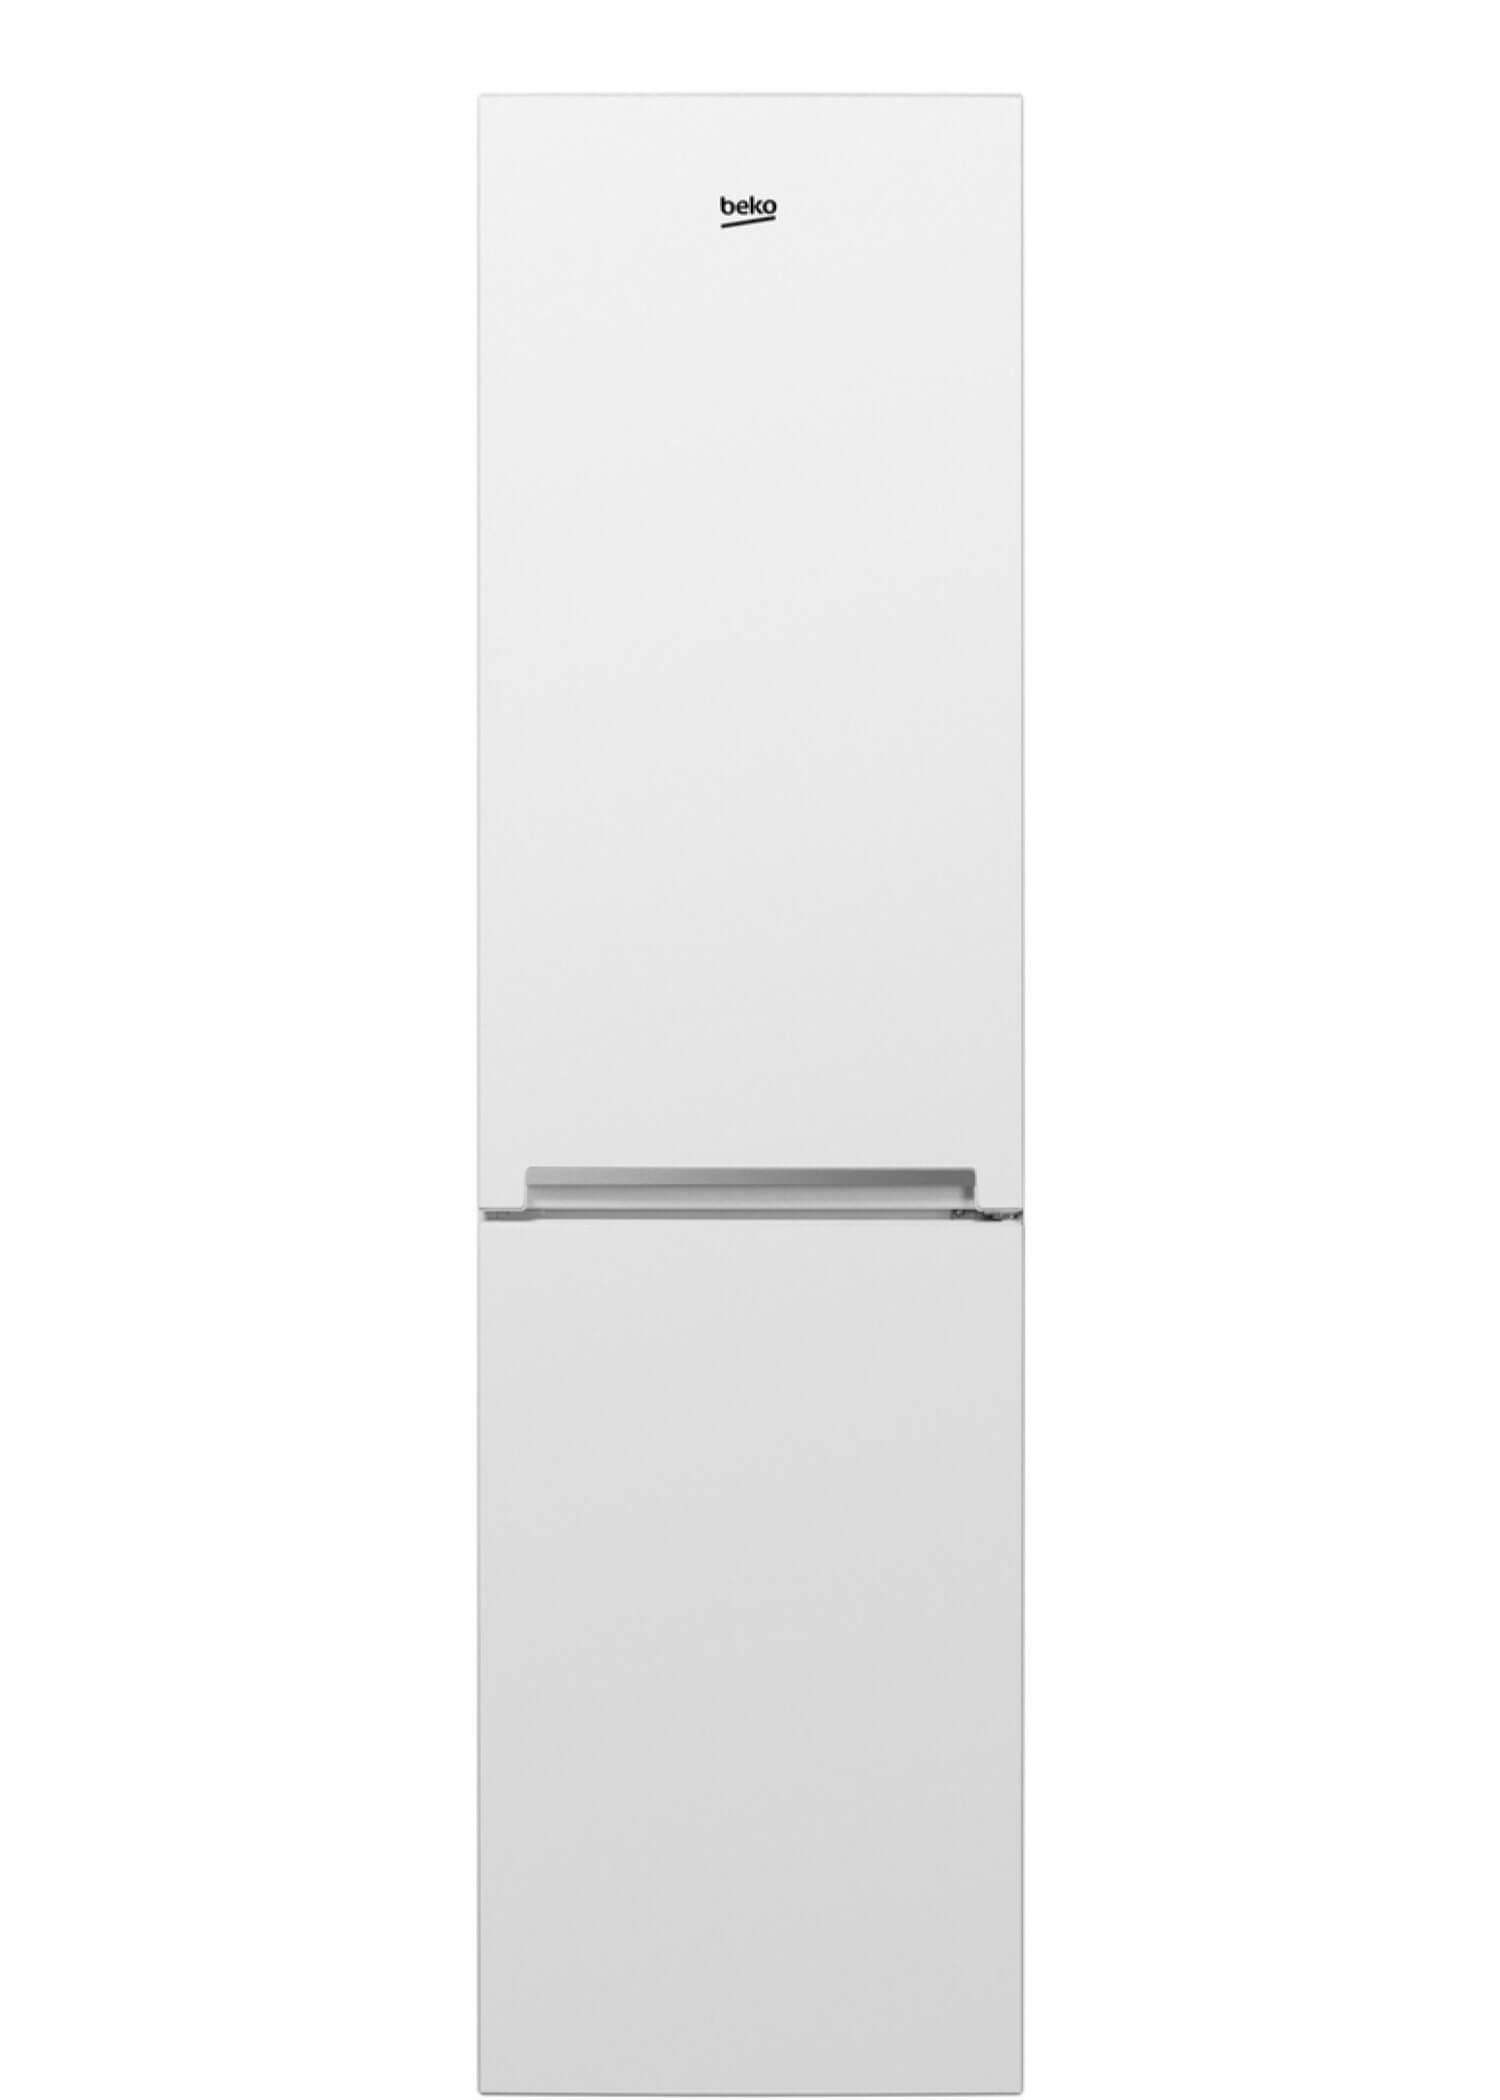 Beko RCNK 335K00W front-tinified